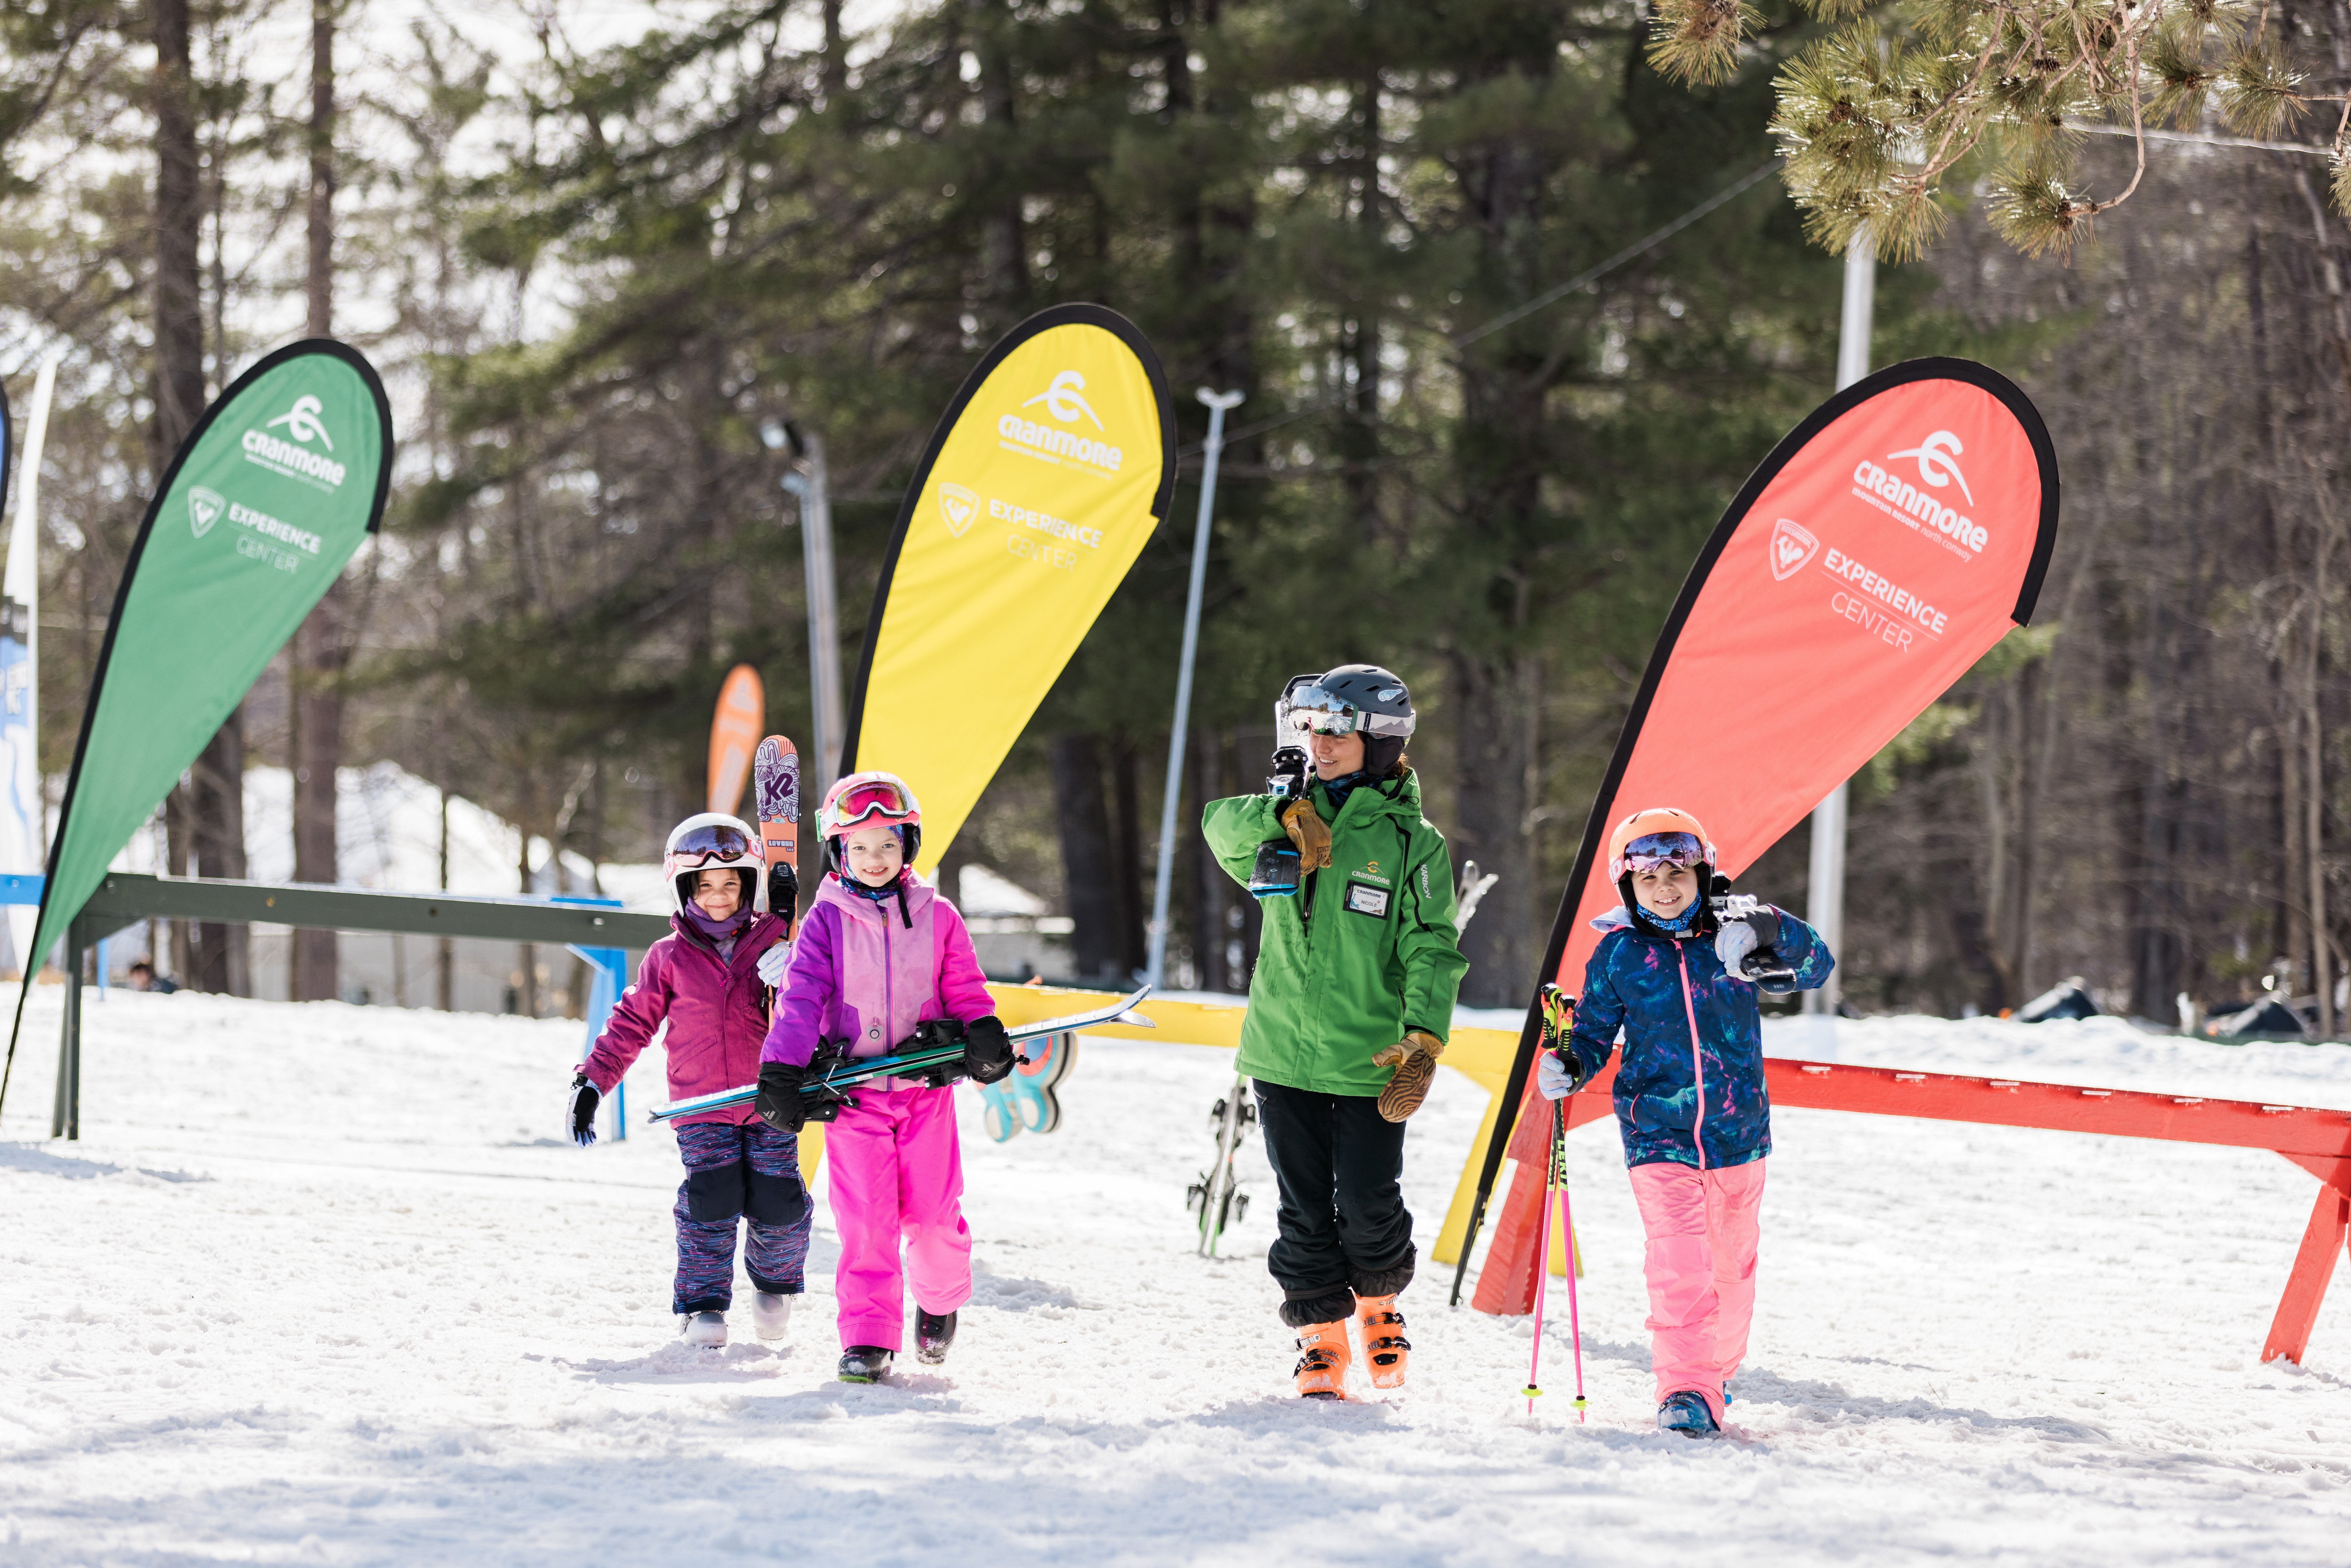 3 kids carrying skis with instructor